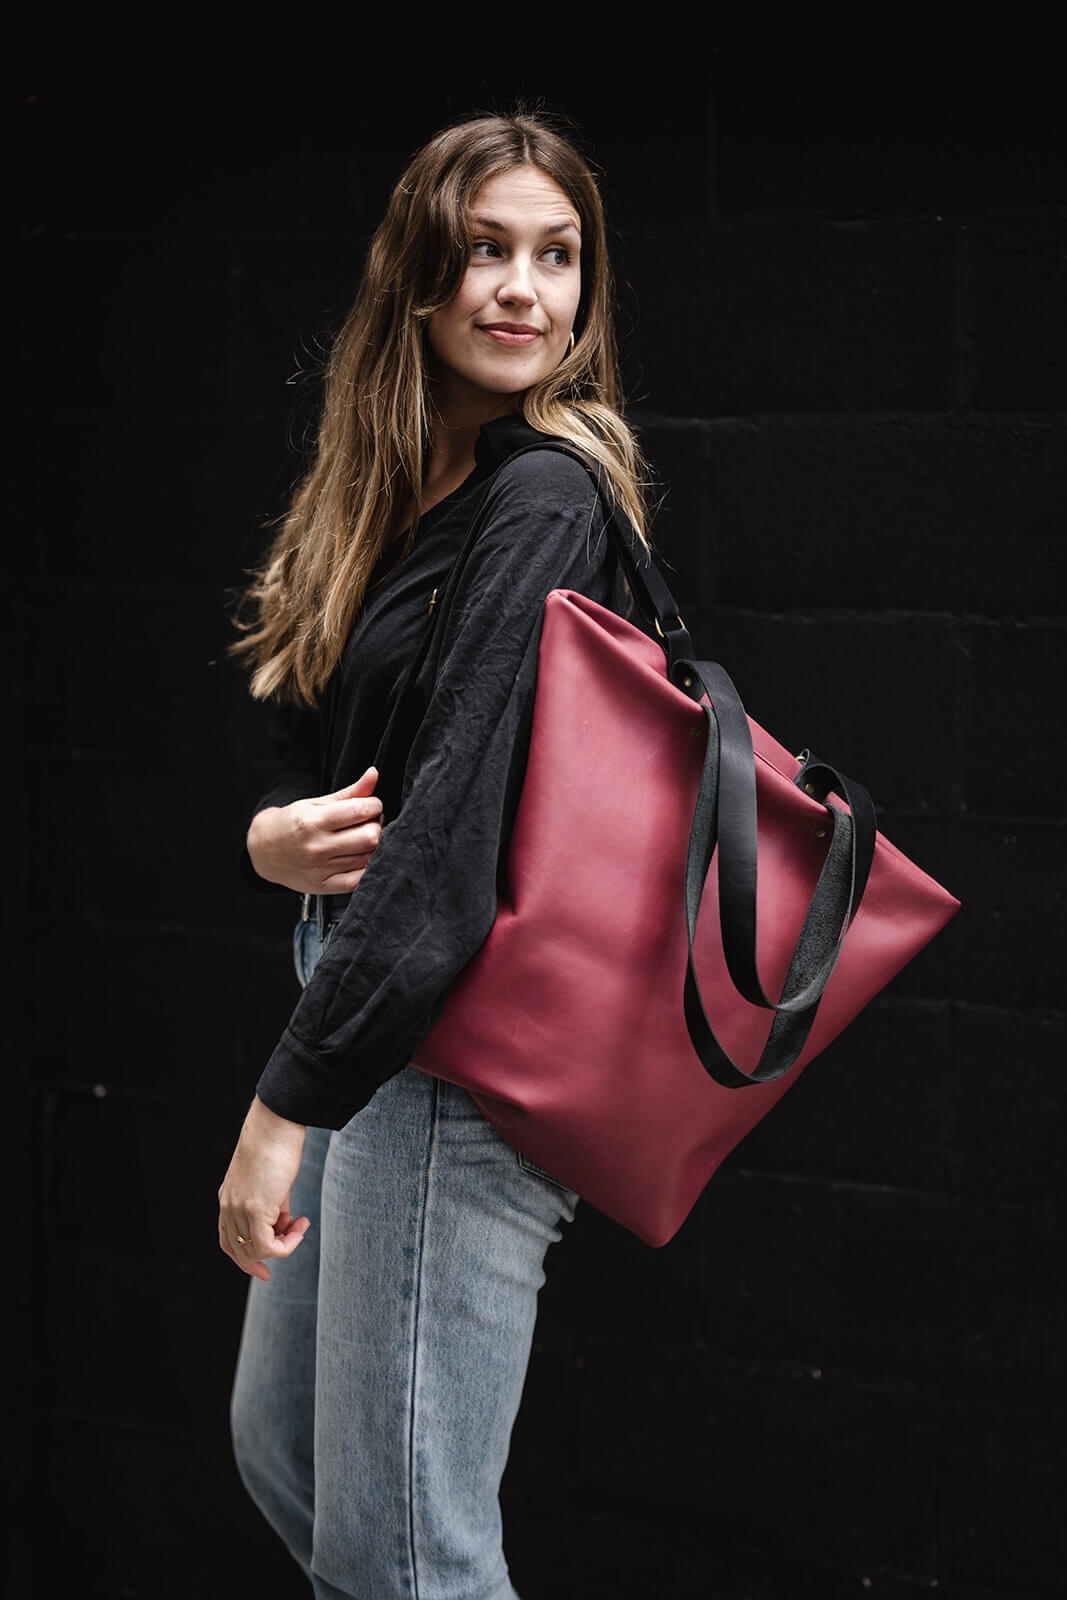 Woman in black top, pale blue jeans, and cherry leather backpack on one shoulder. She is looking over her shoulder and has long flowing hair. The backpack is the Cherry Leather Backpack & Tote by Ella Jackson